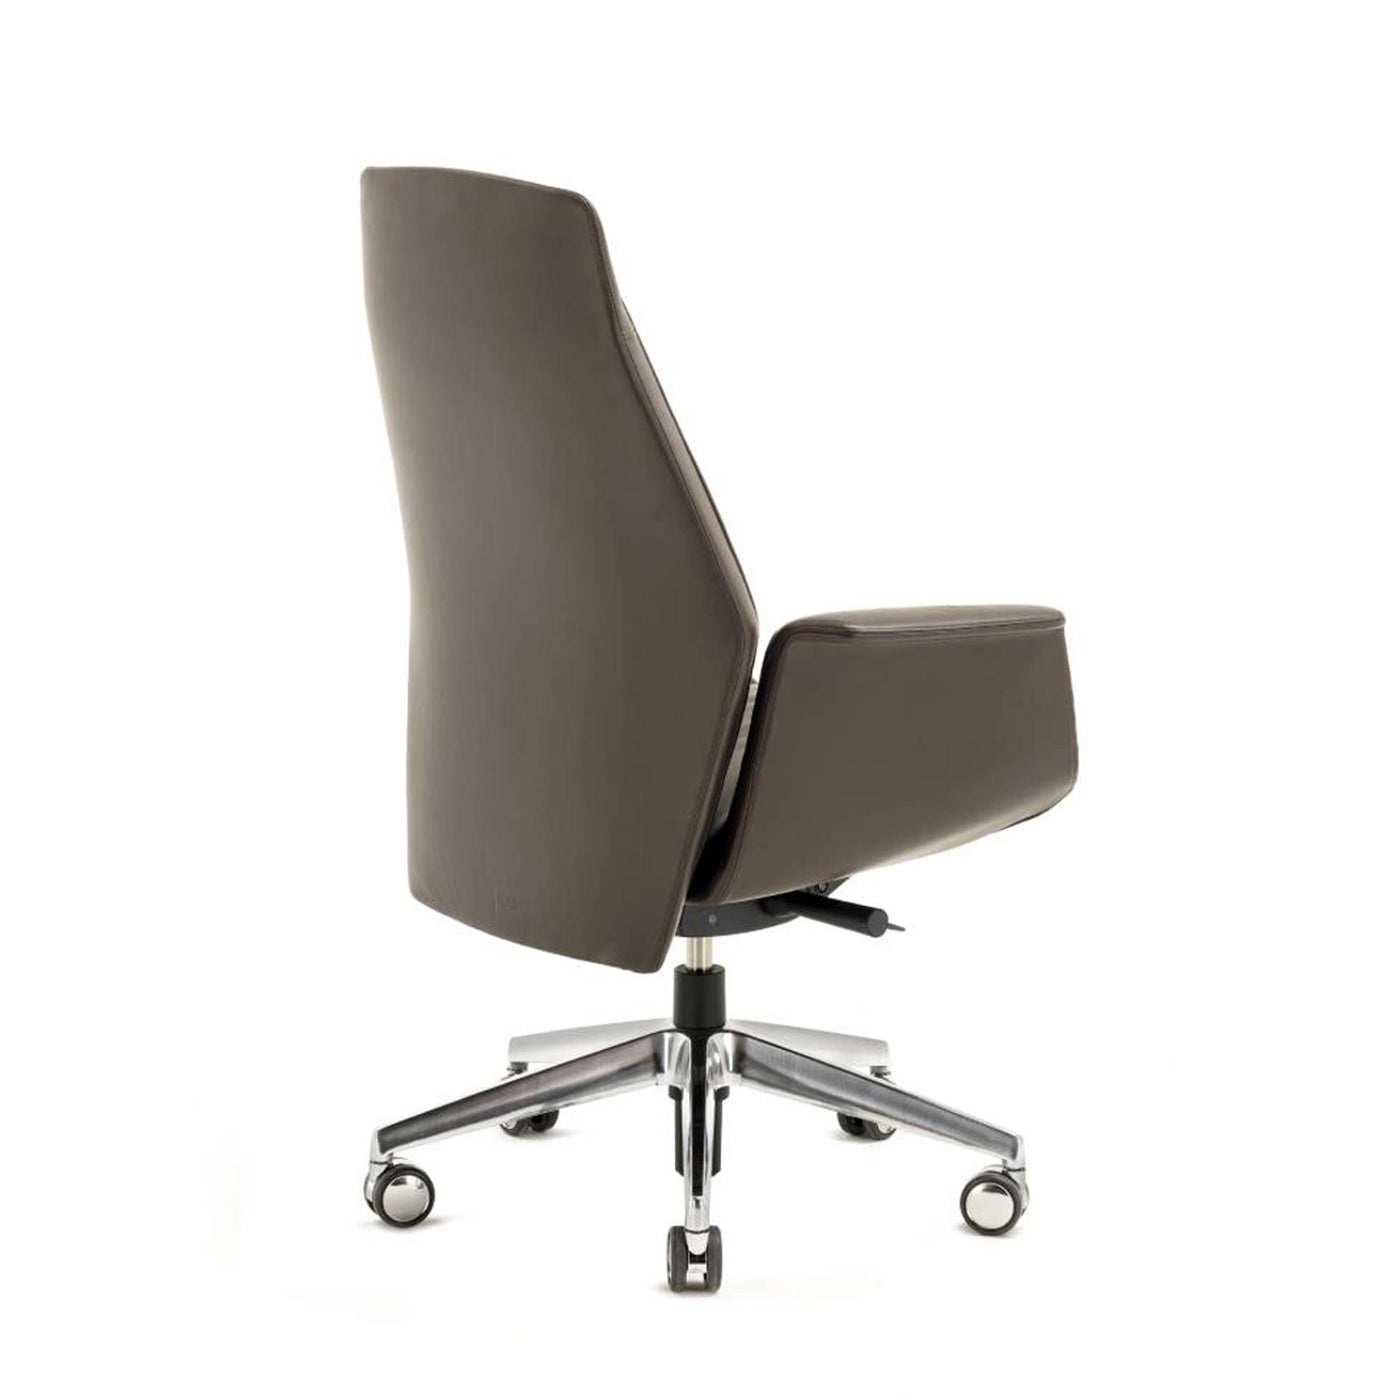 Office Swivel Chair with Wheels DOWNTOWN EXECUTIVE by Jean-Marie Massaud for Poltrona Frau 04